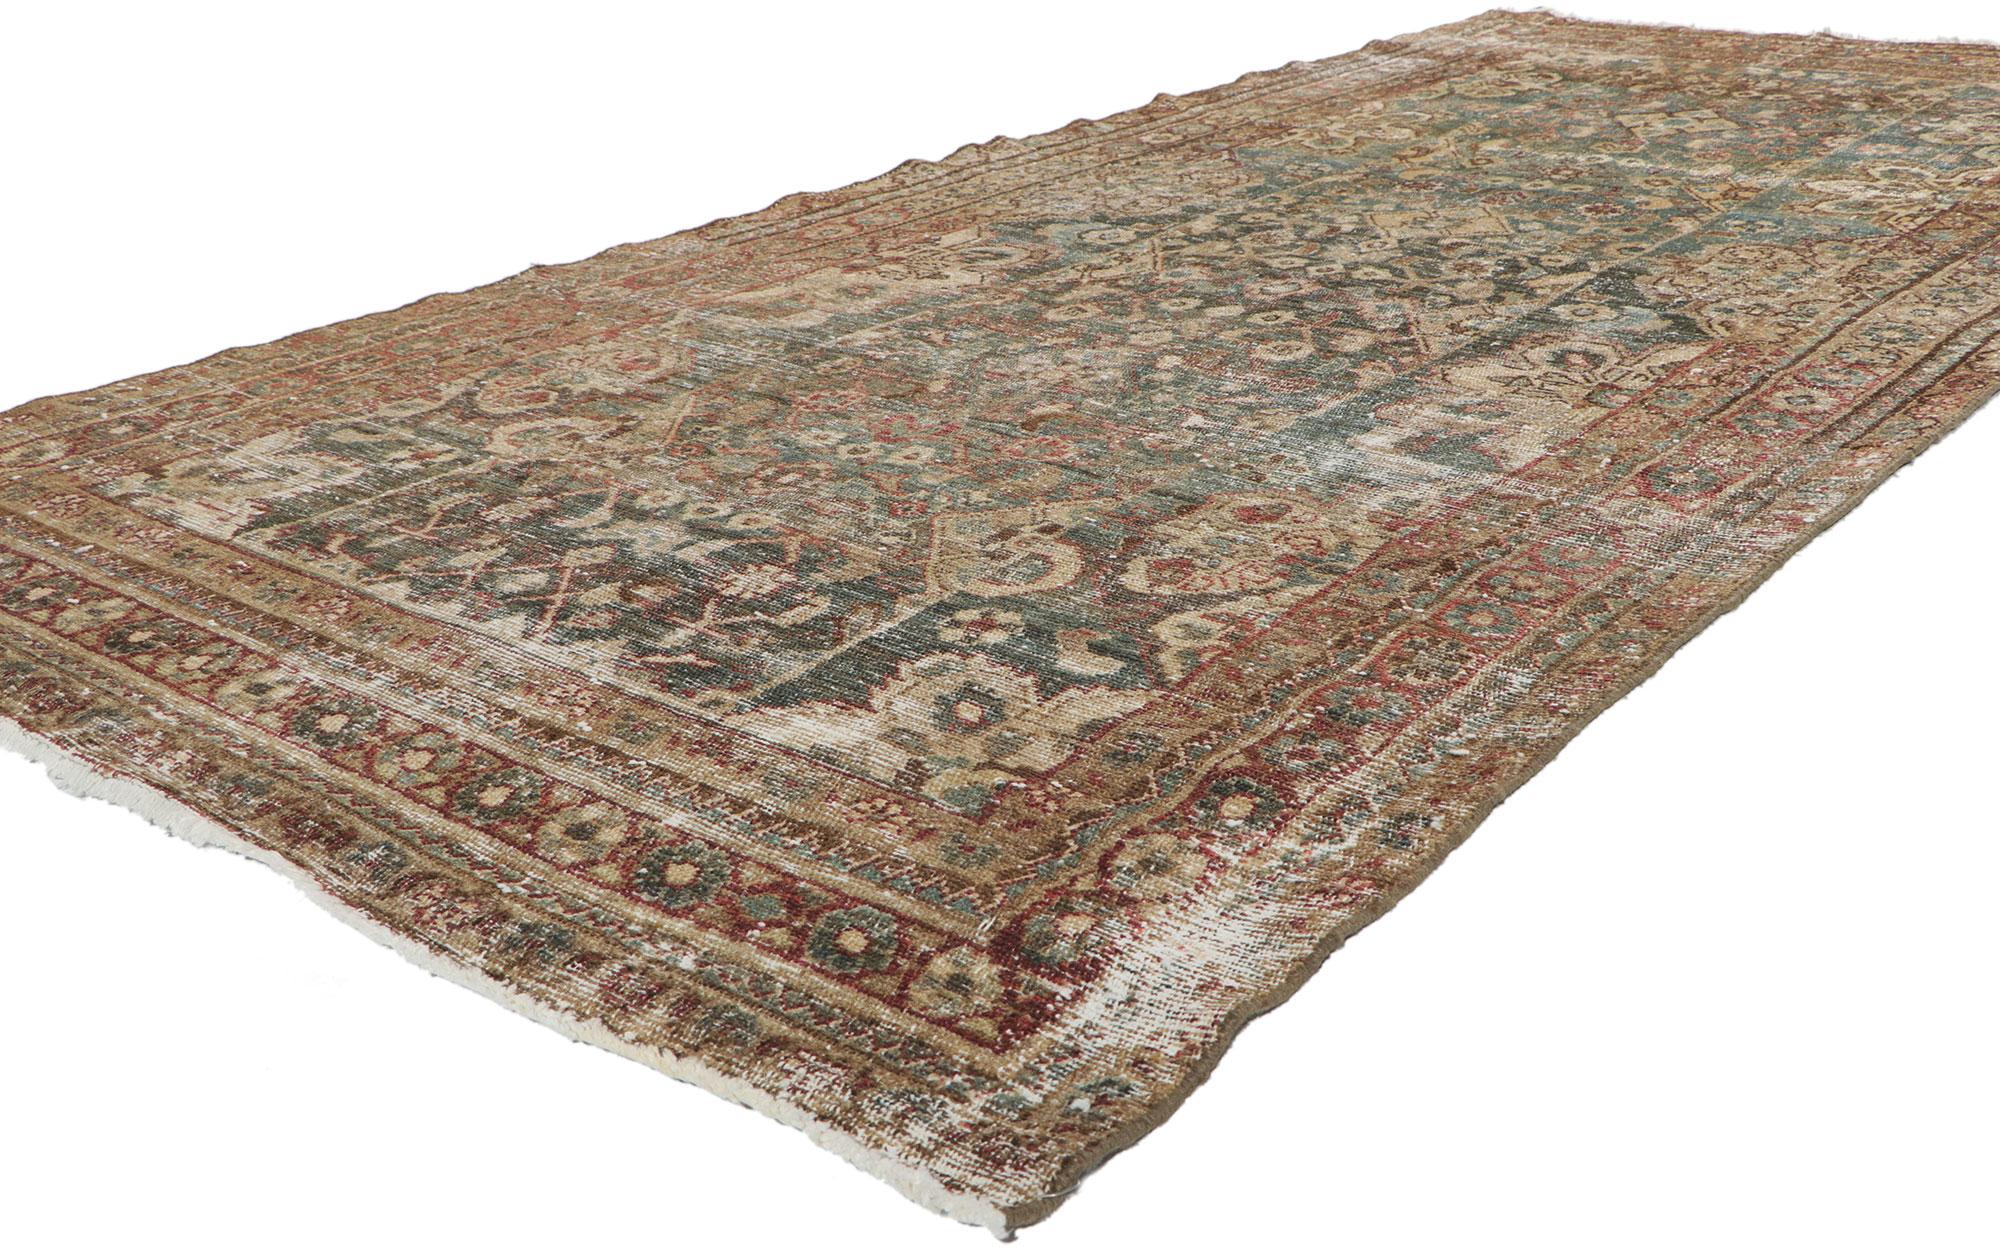 60956 Distressed Antique Persian Malayer Rug, 04'08 x 10'01. 
The perfect fusion of rustic charm and relaxed refinement is embodied in this exquisite hand-knotted wool distressed antique Persian Mahal rug. Crafted with utmost care, its faded Herati